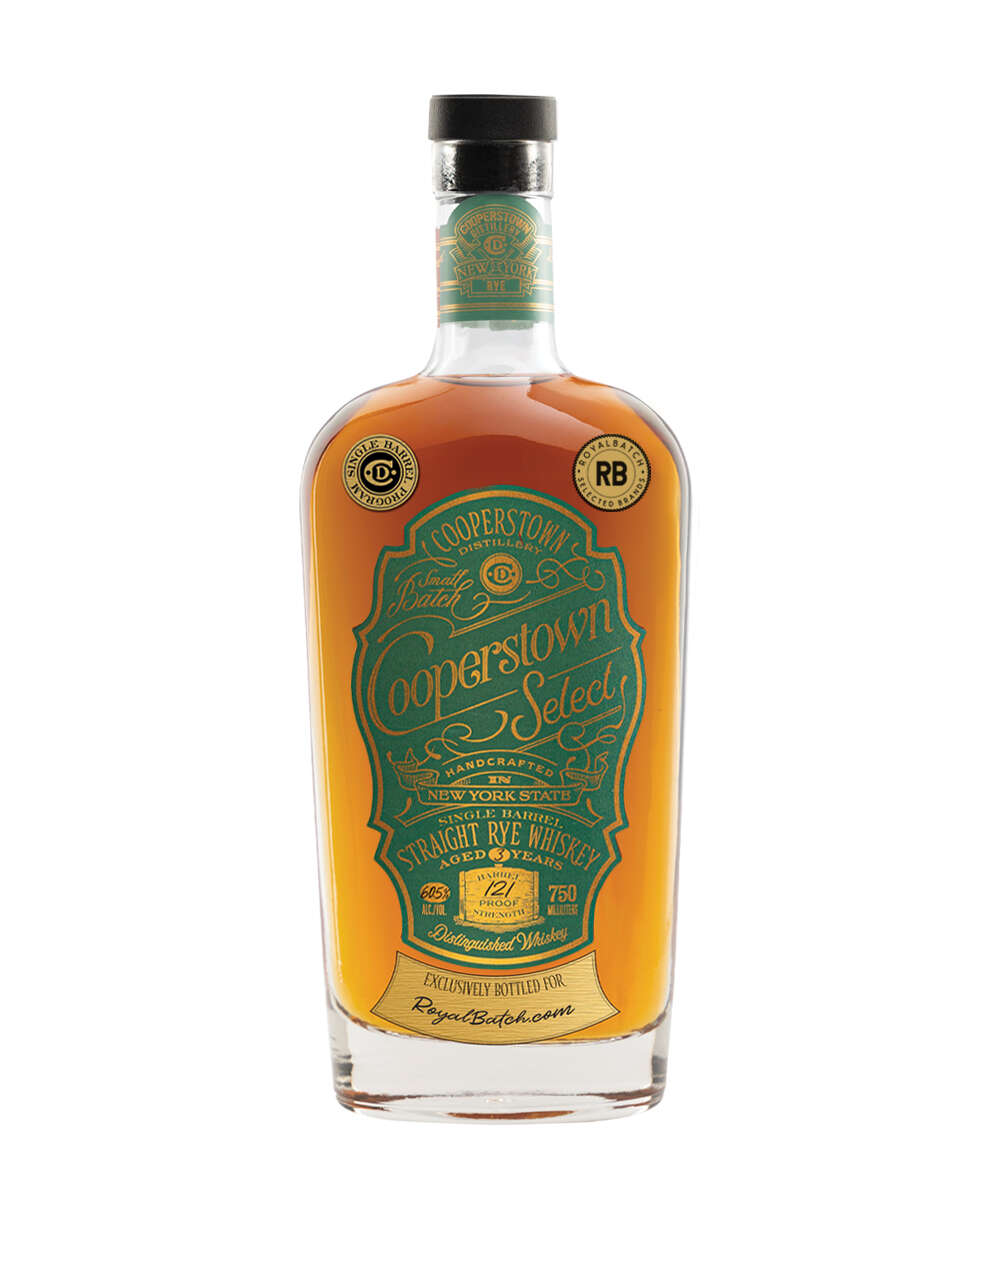 Cooperstown Select Rye Whiskey 121 Proof Exclusively Bottled for ROYAL BATCH